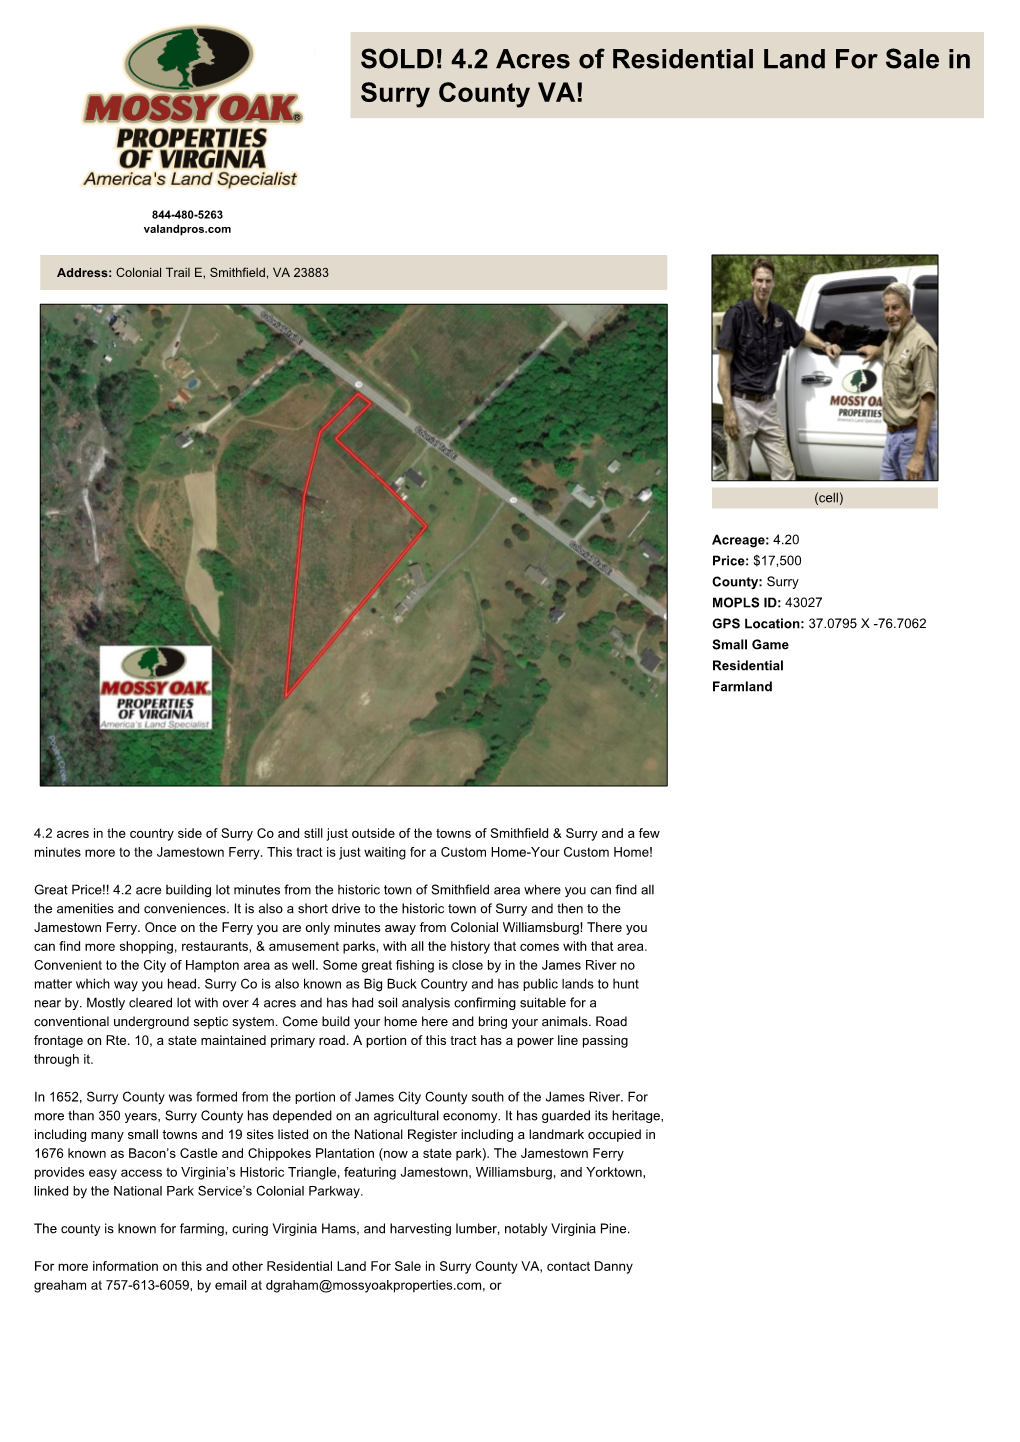 4.2 Acres of Residential Land for Sale in Surry County VA!